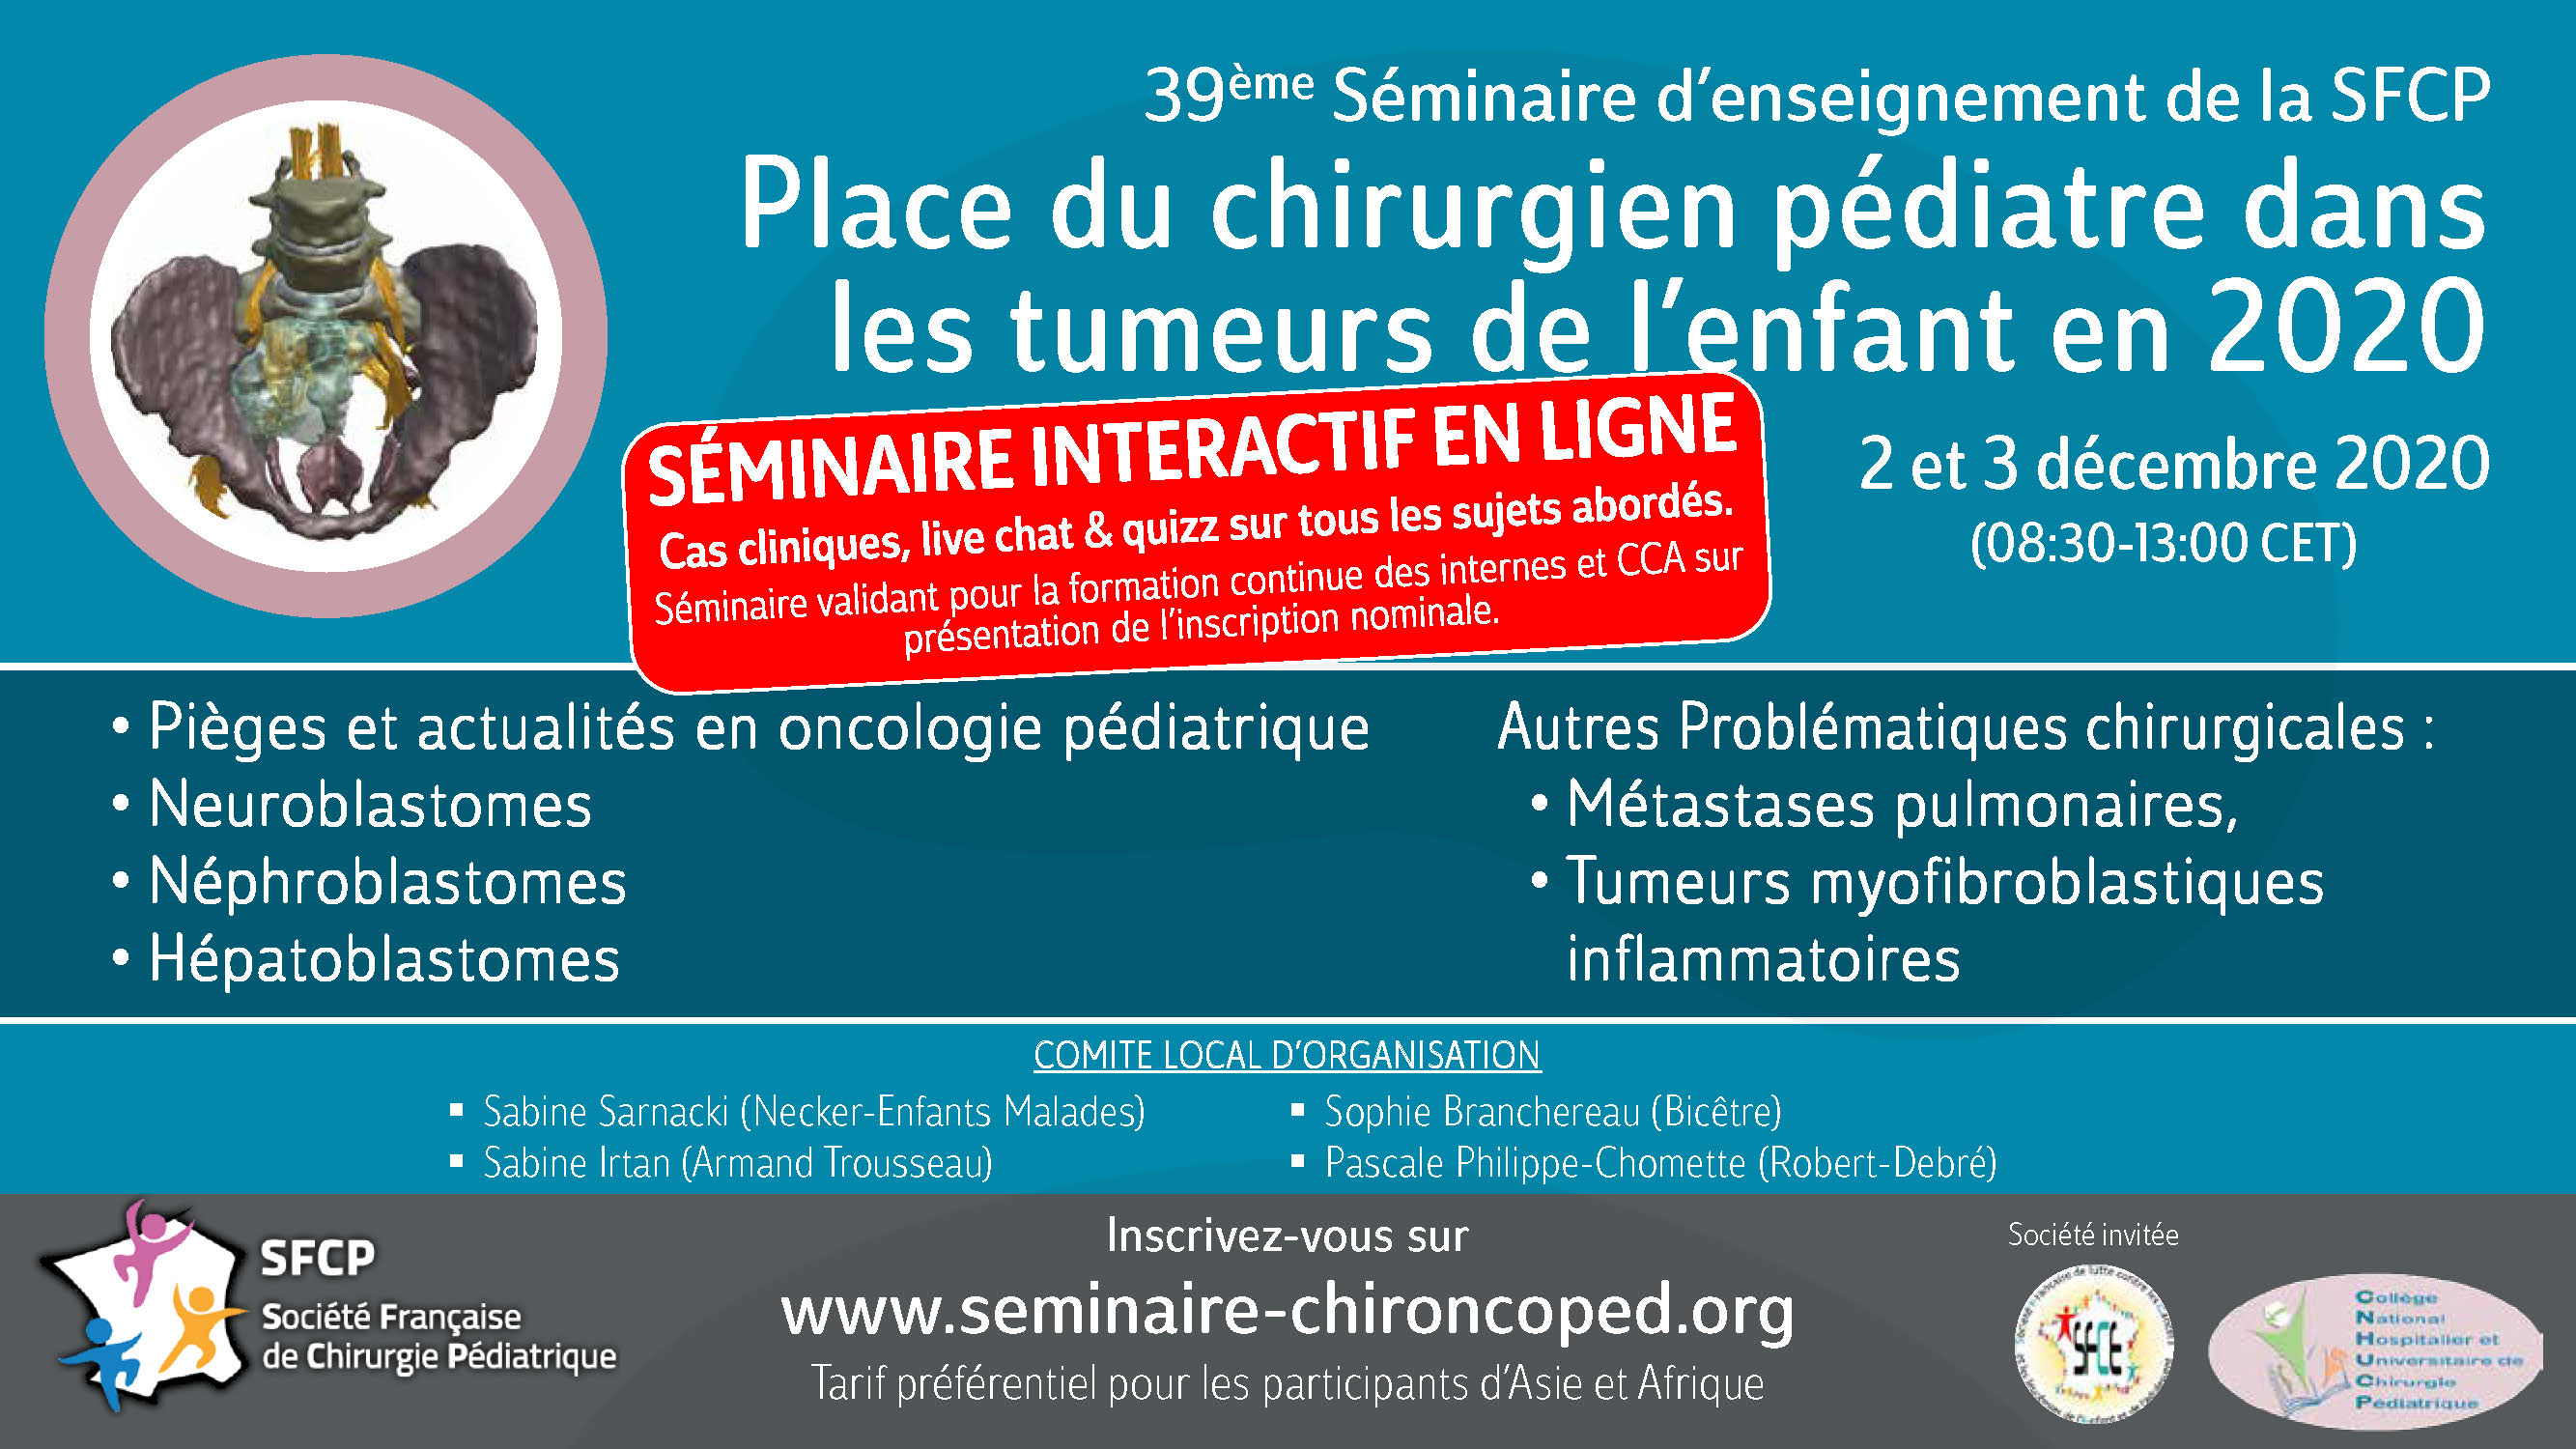 39th Teaching Seminar of the French Society of Pediatric Surgery - SFCP 2020